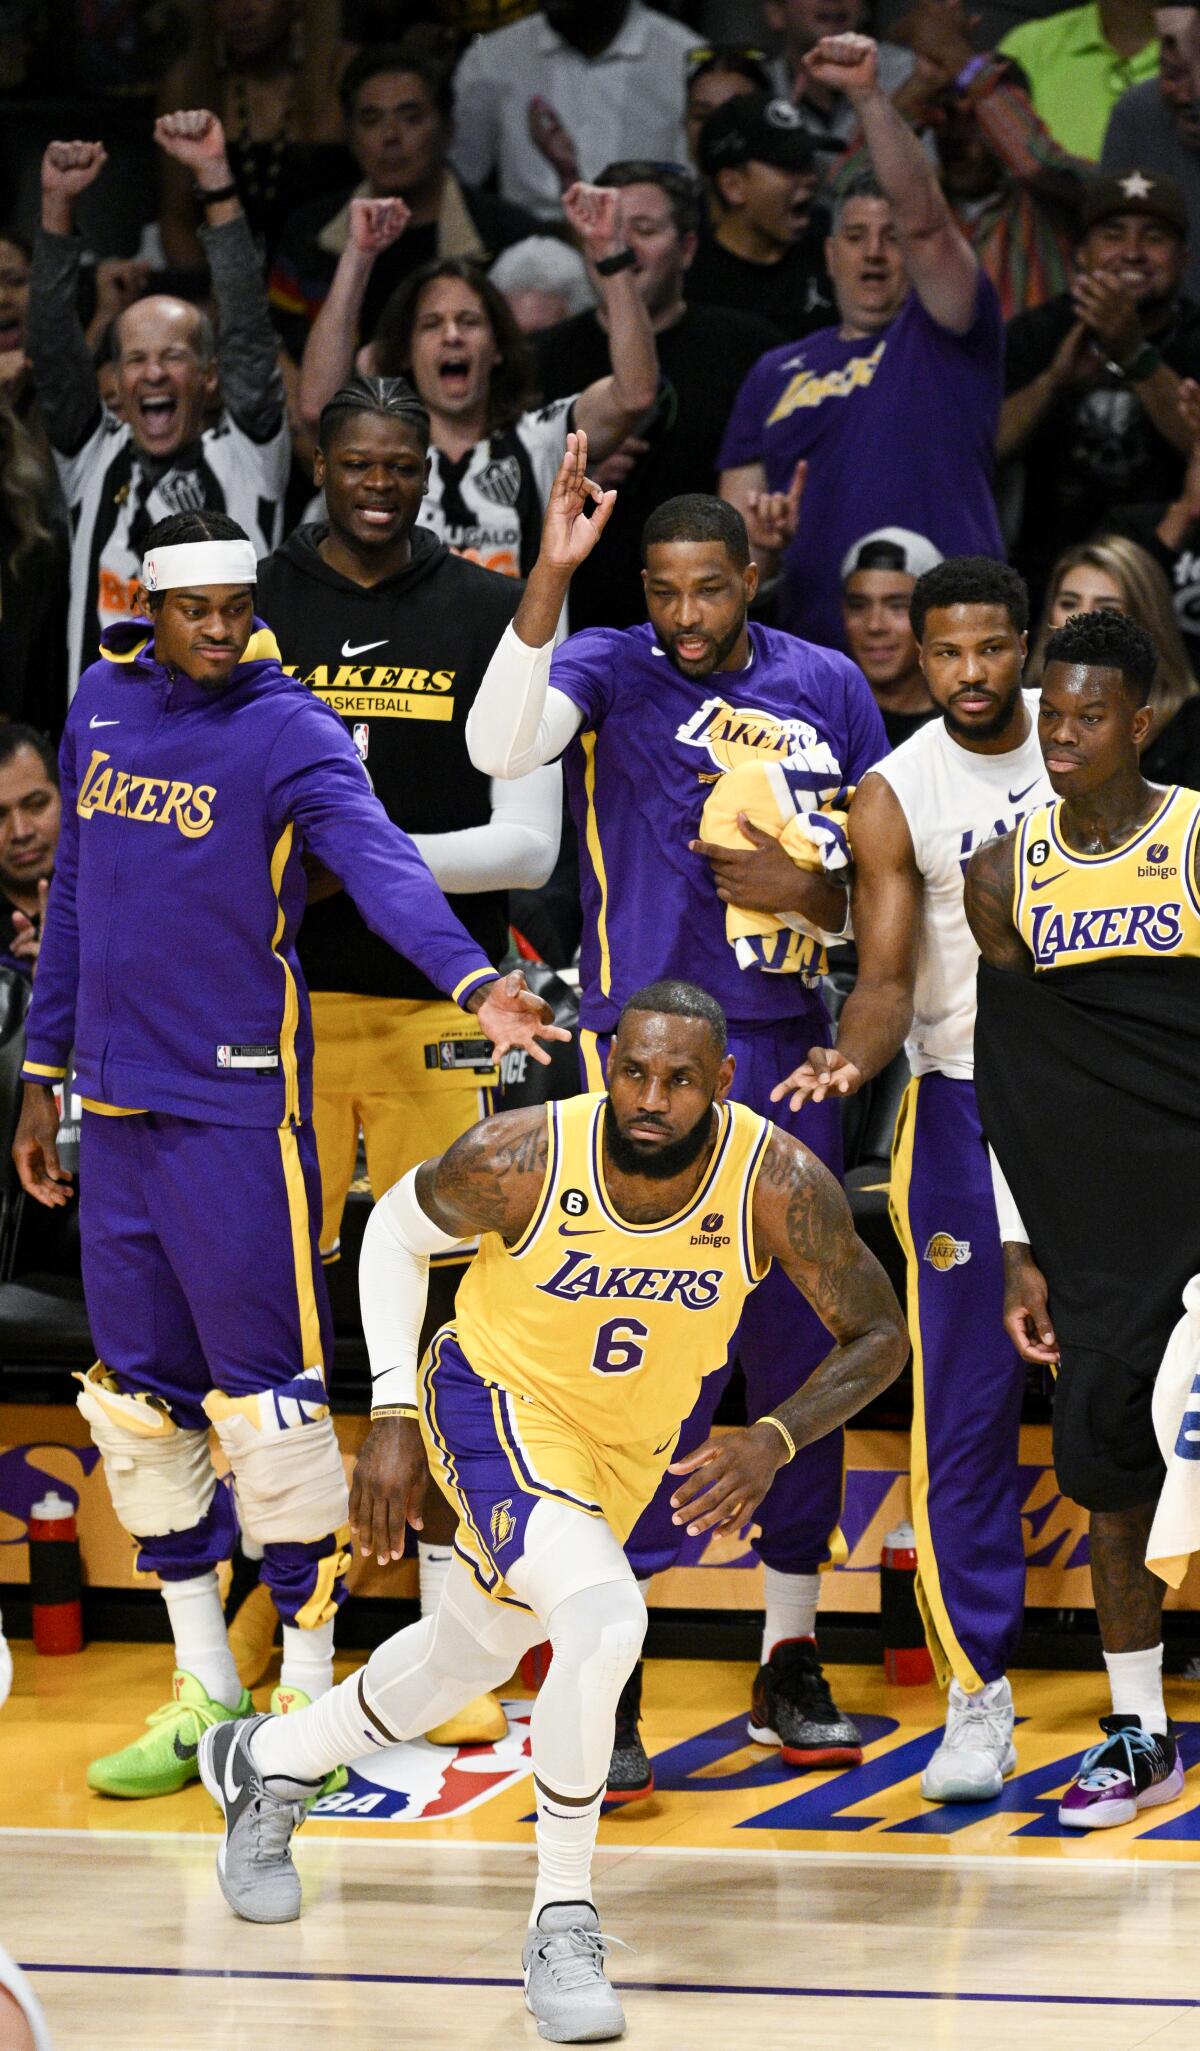 Fans react in the background as Lakers forward LeBron James sprints up court after making a three-point shot.